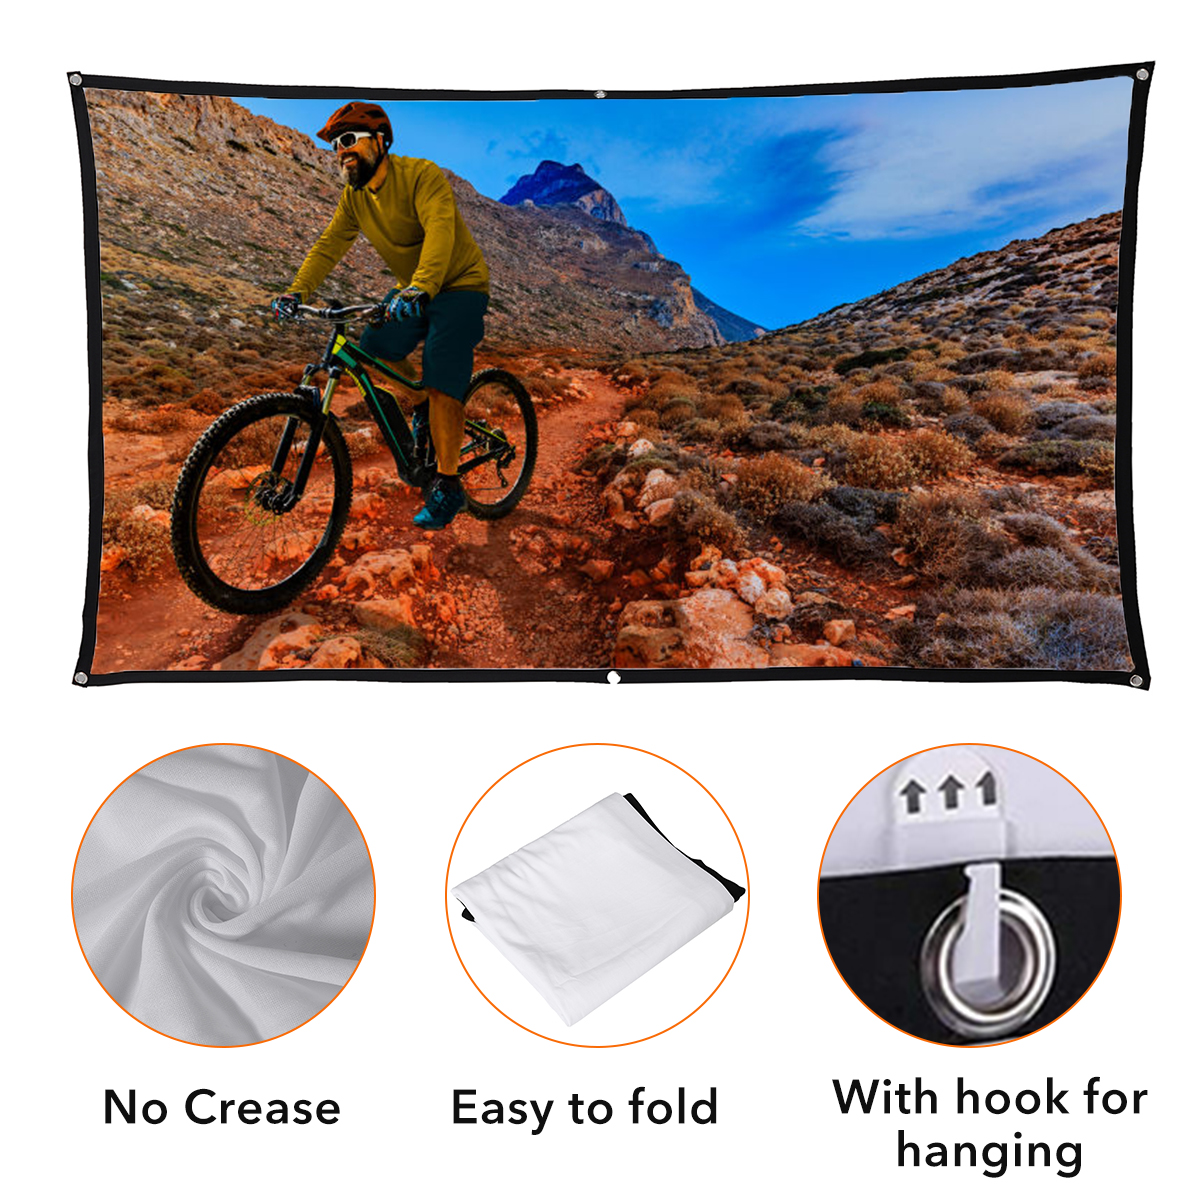 16-9-Projector-Screen-Home-Projection-Screen-Cloth-Outdoor-Portable-Folding-Simple-Soft-Curtain-with-1749217-2